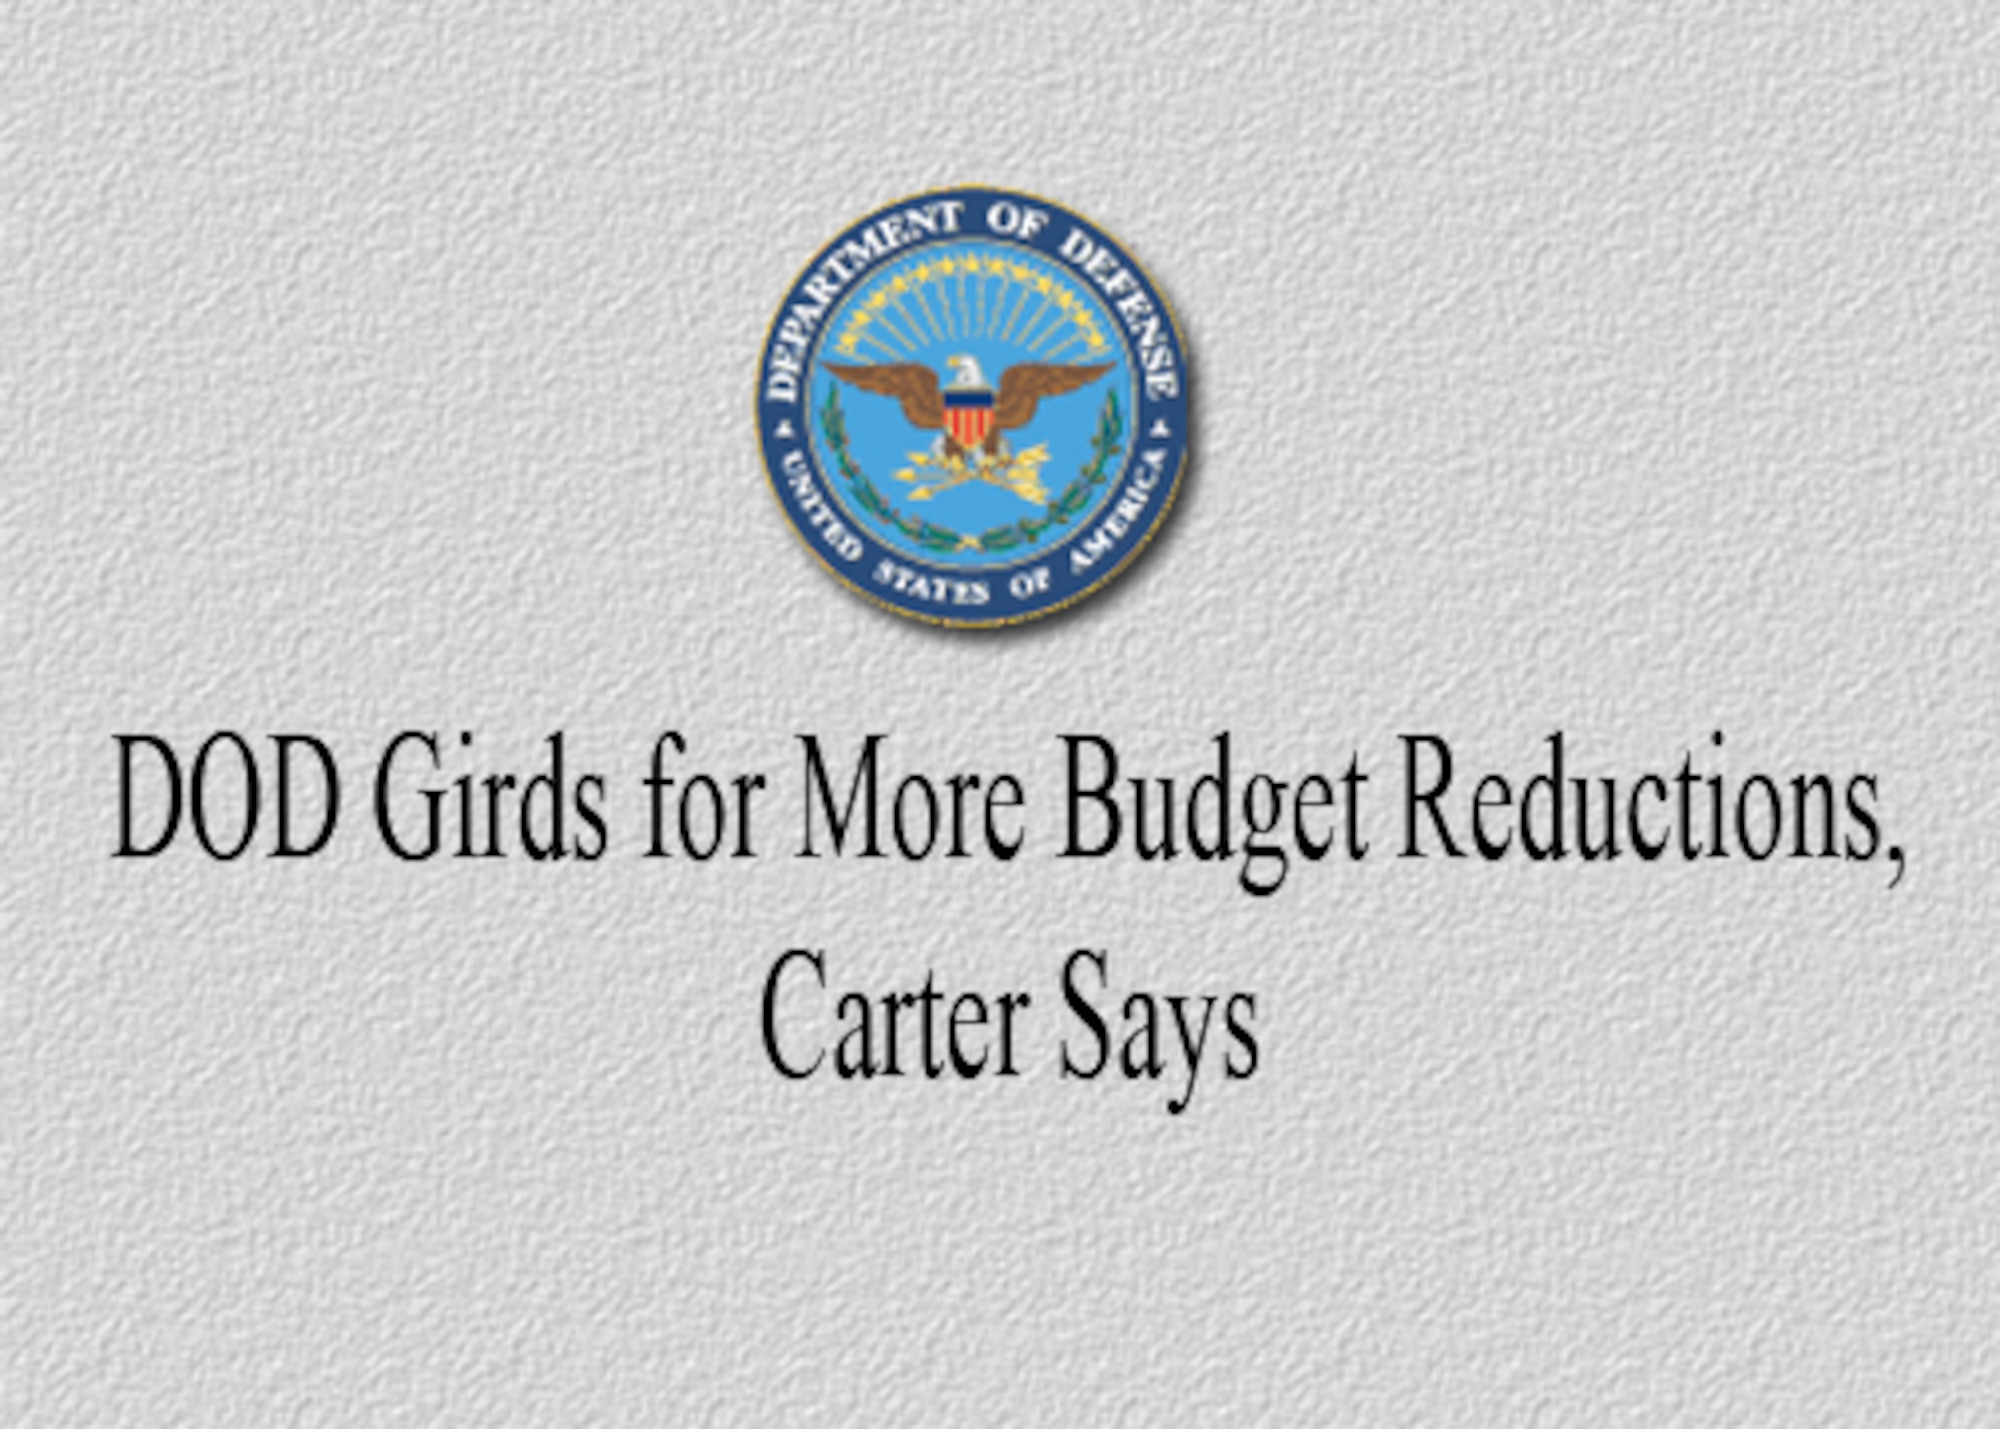 Ten days after unpaid furloughs began nationwide for many DOD civilian employees as a measure to meet sequester cuts, Deputy Defense Secretary Ash Carter said yesterday the department is planning for similar budget cuts that may continue into fiscal year 2014 and perhaps beyond.
